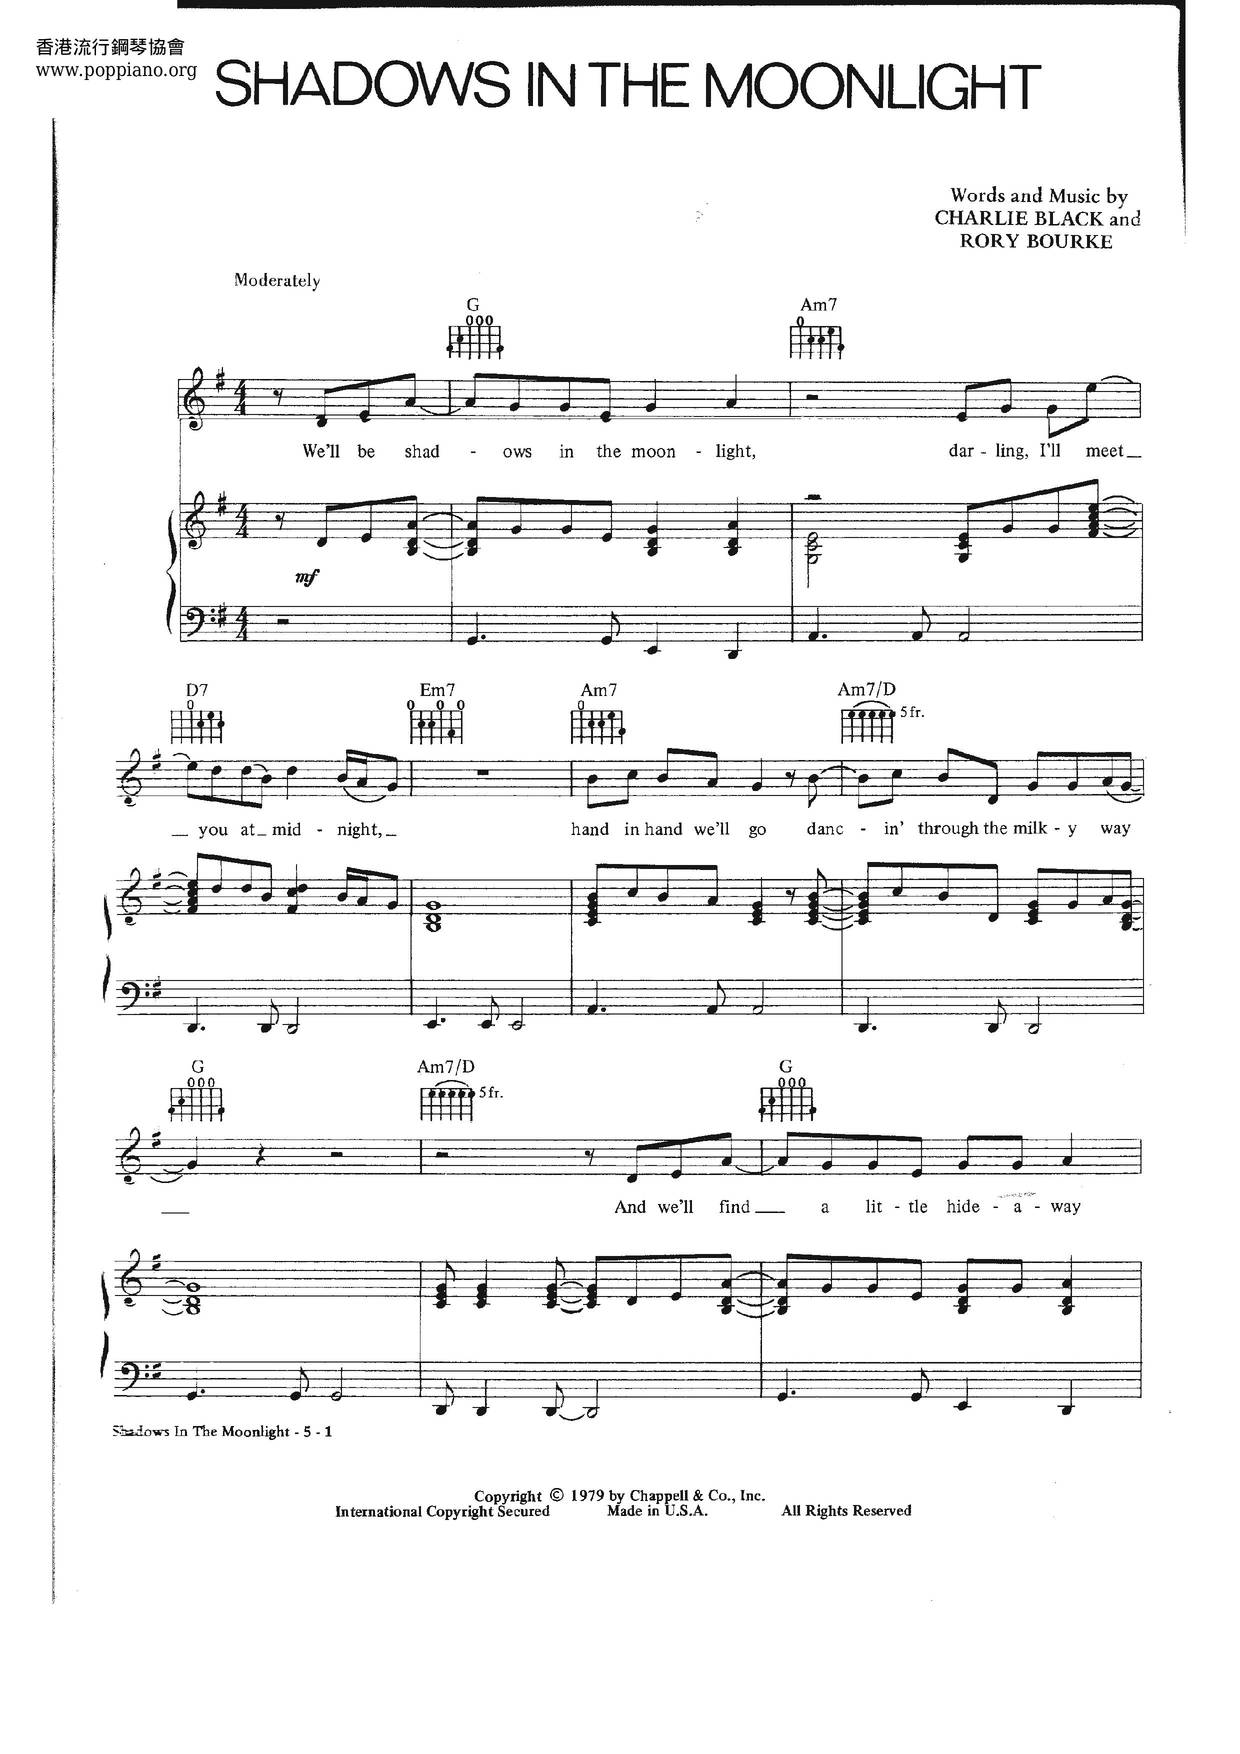 Shadows In The Moonlight Score